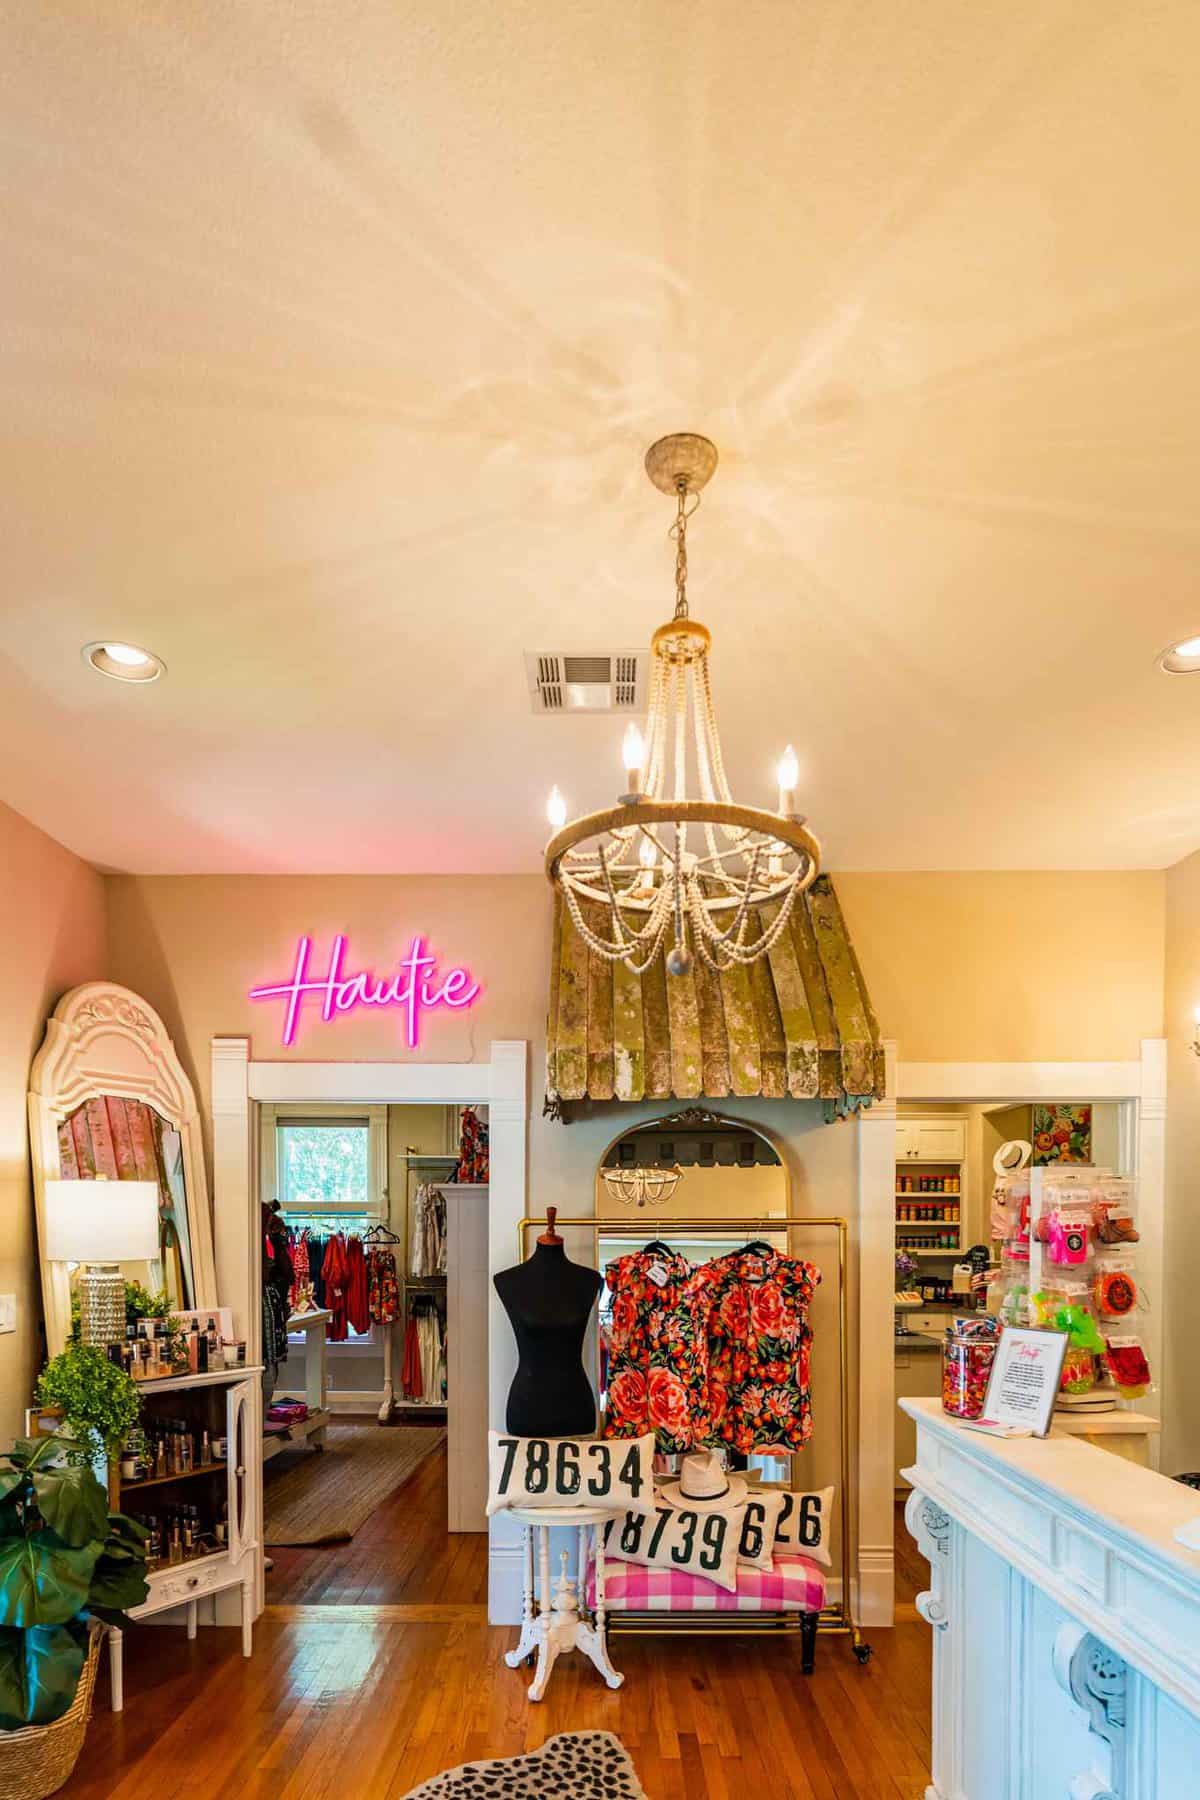 Boutique interior with chandelier, clothes on display and "Hautie" neon sign